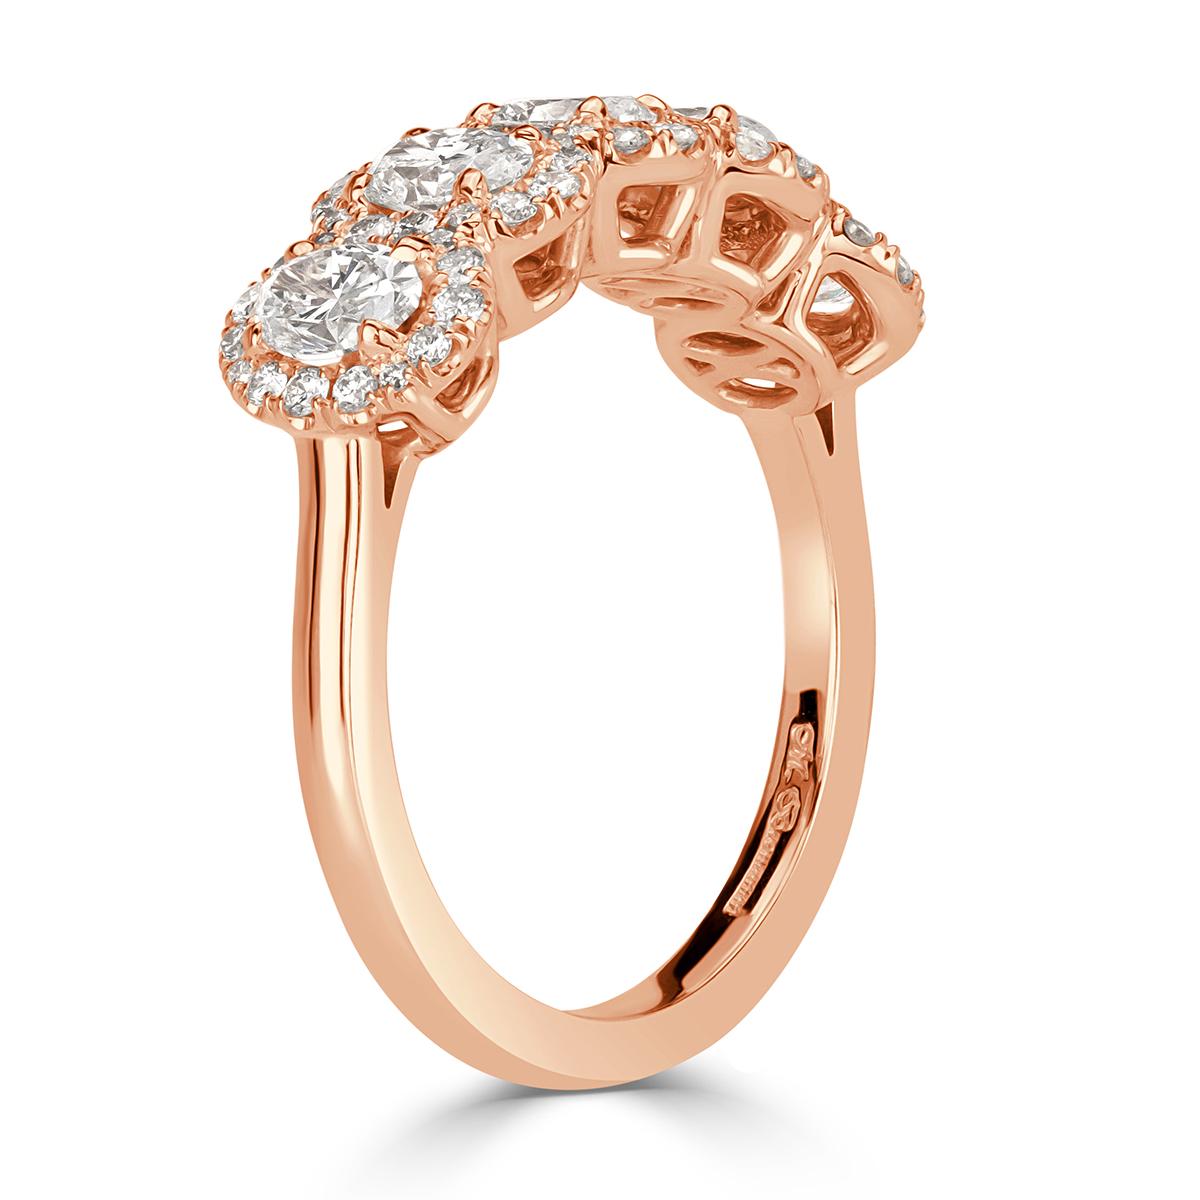 Mark Broumand 1.33 Carat Oval Cut Diamond Five-Stone Ring in 18 Karat Rose Gold In New Condition For Sale In Los Angeles, CA